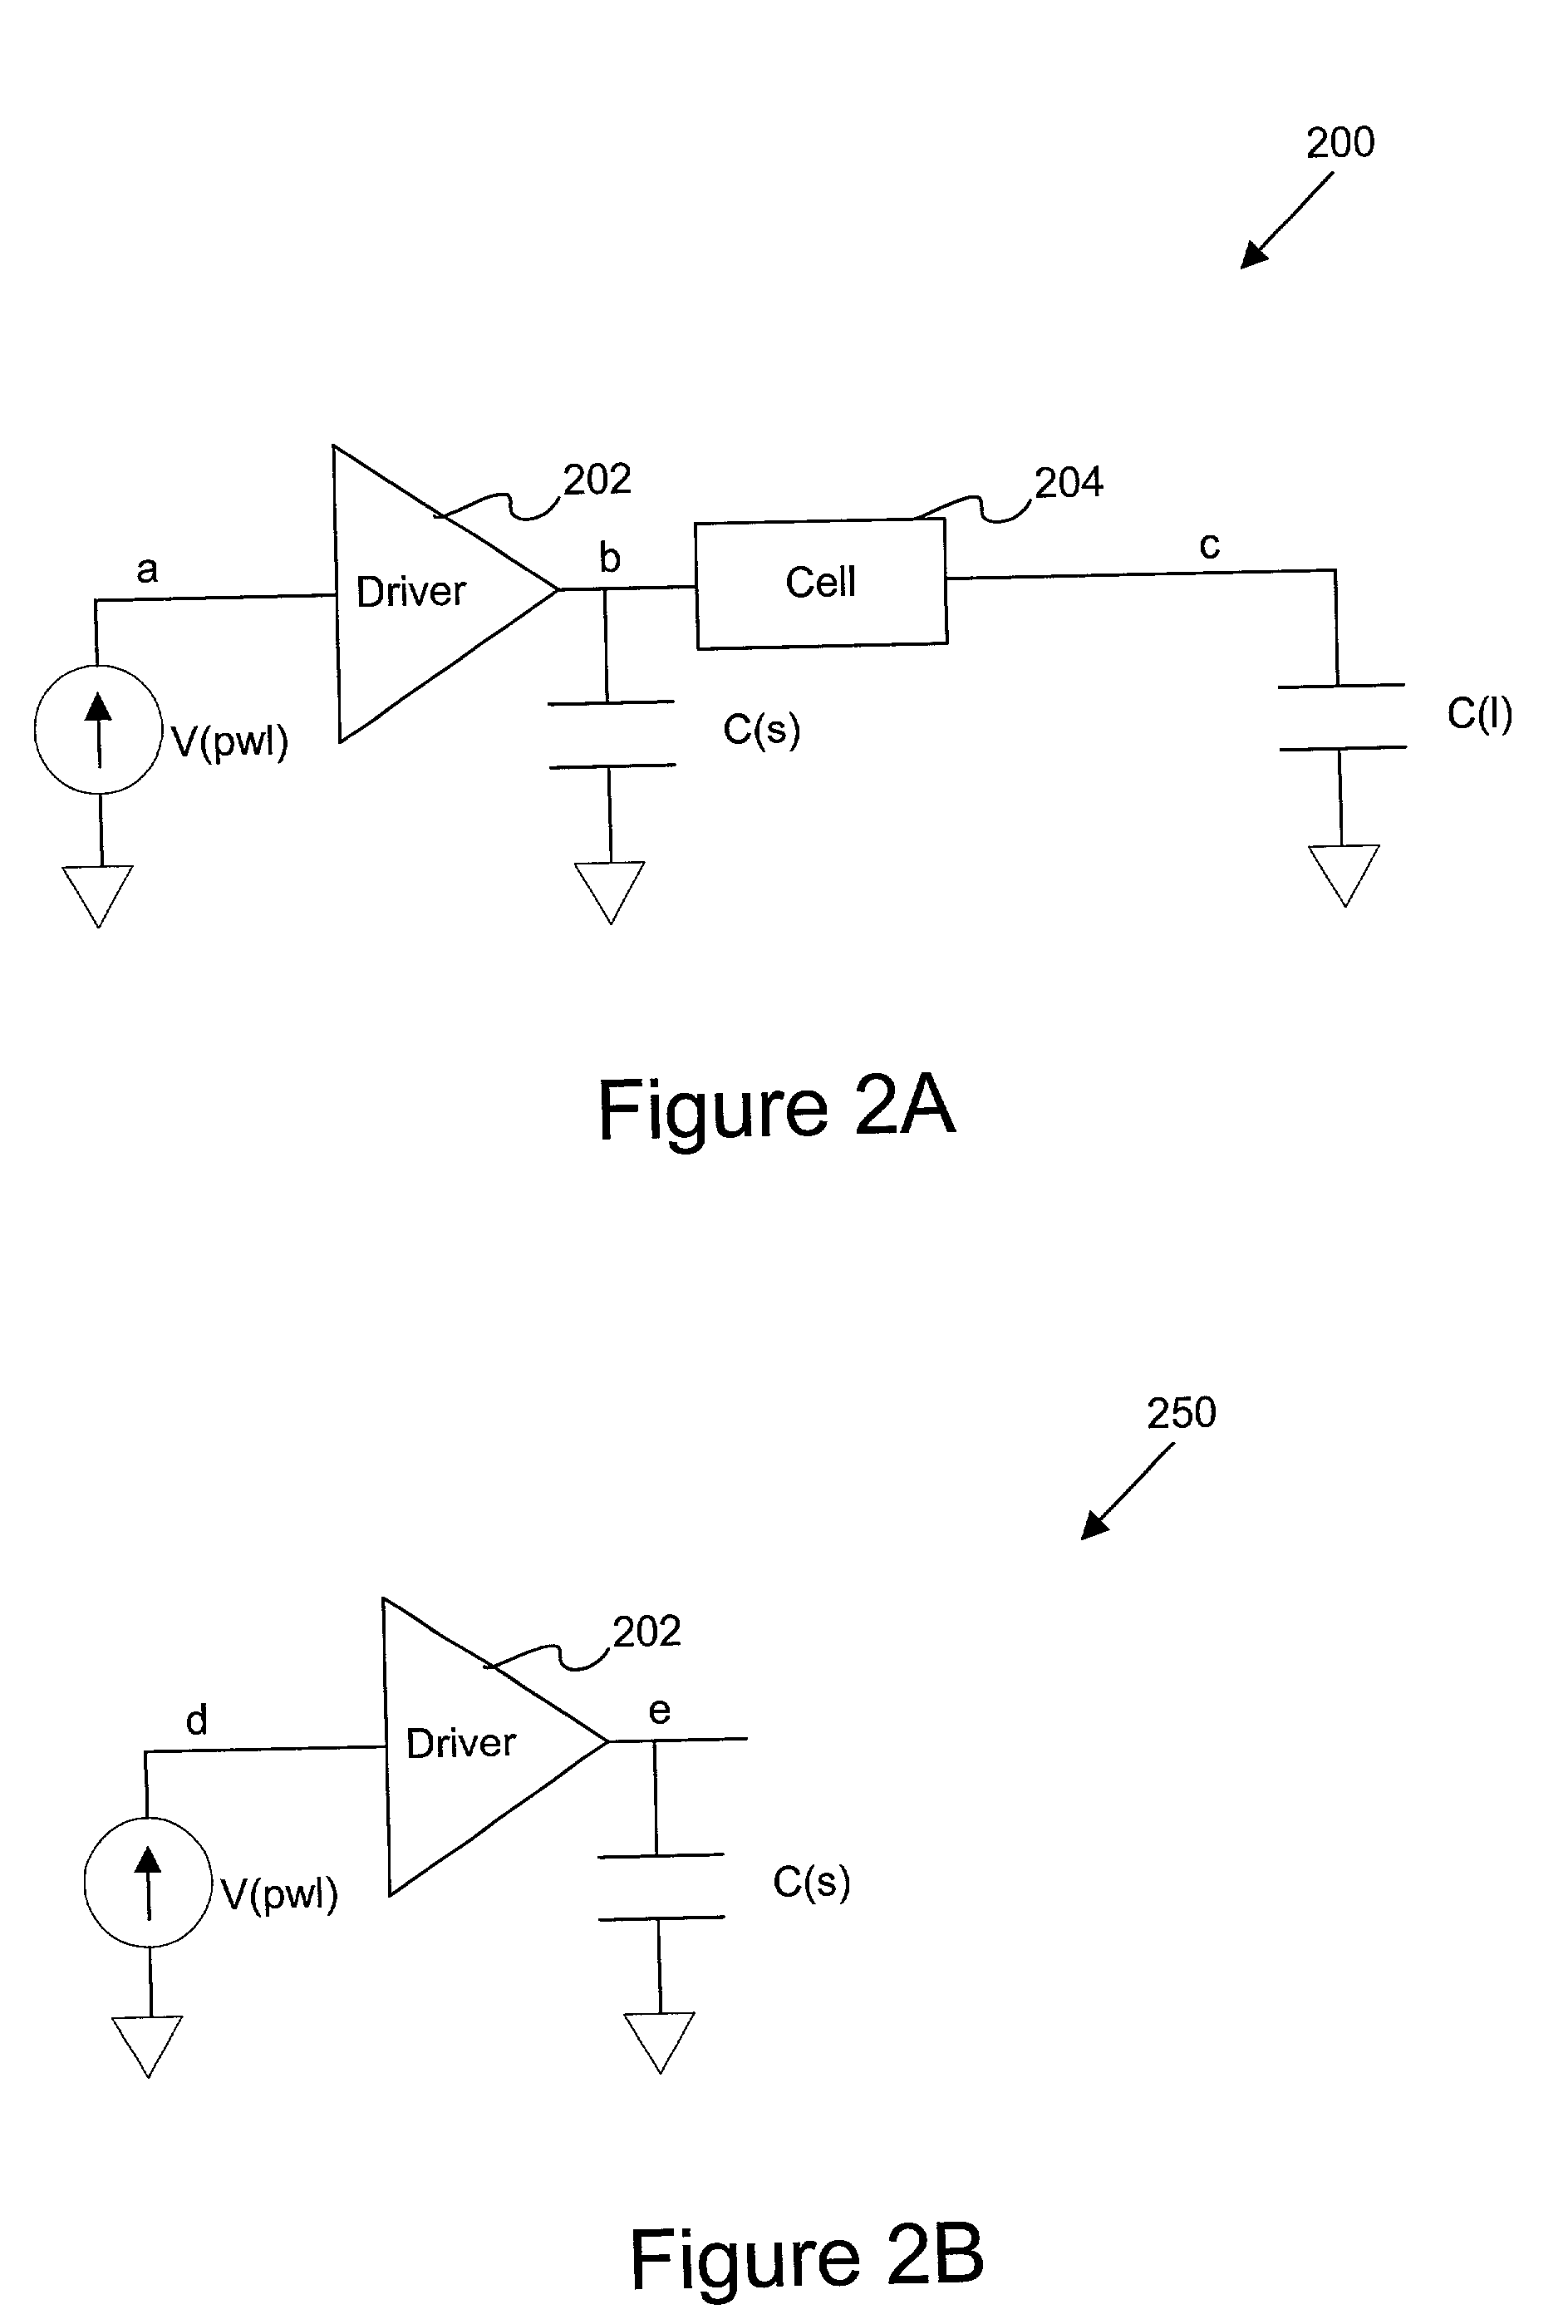 Apparatus and methods for wire load independent logic synthesis and timing closure with constant replacement delay cell libraries